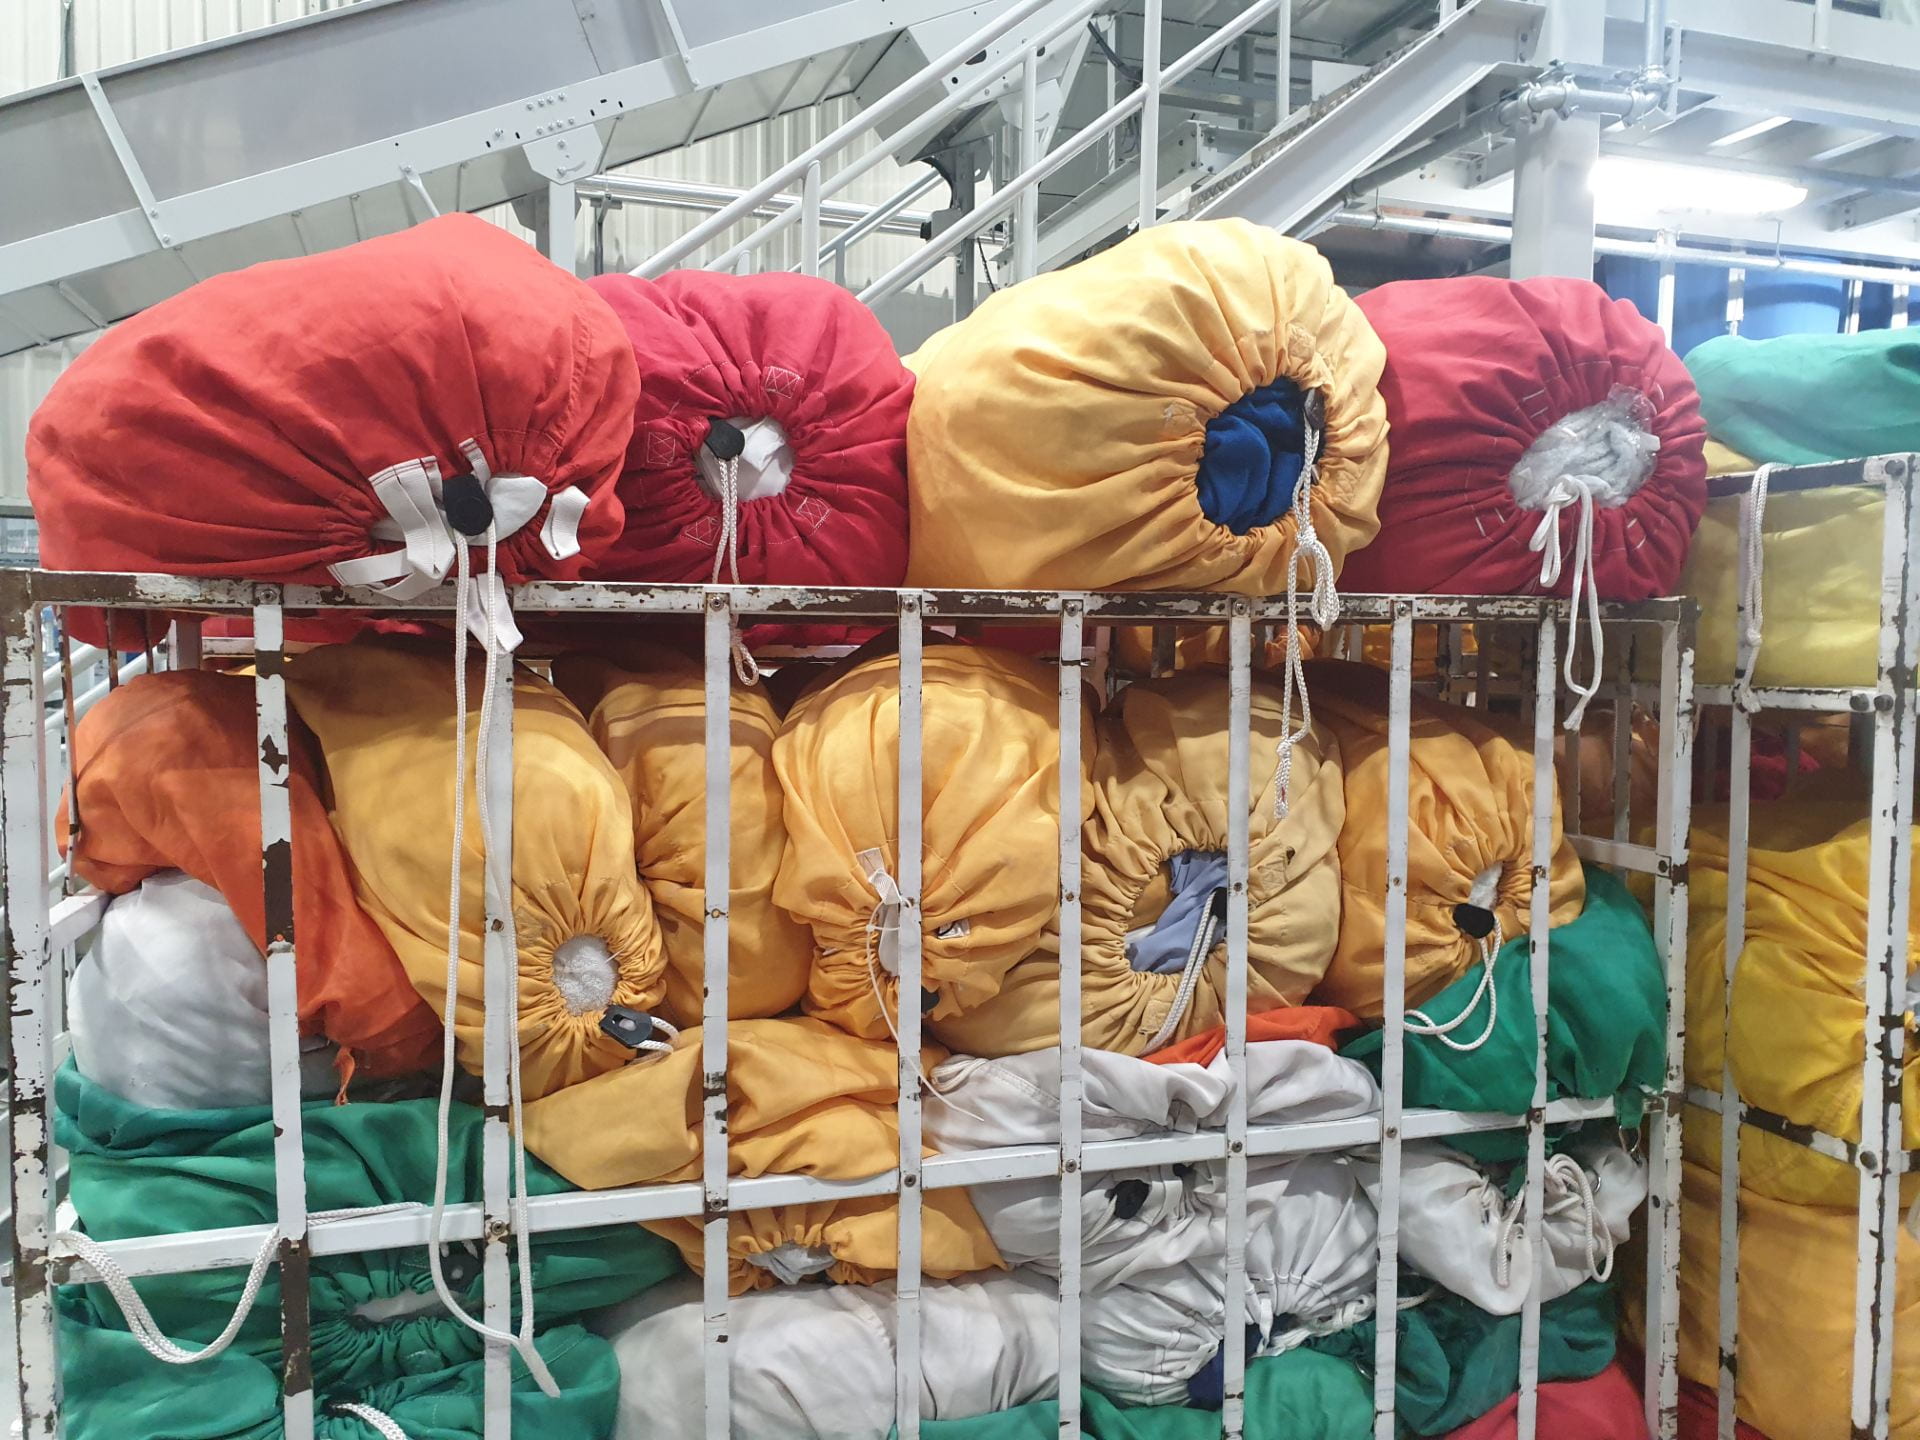 Coloured bags filled with dirty laundry stacked on a trolley